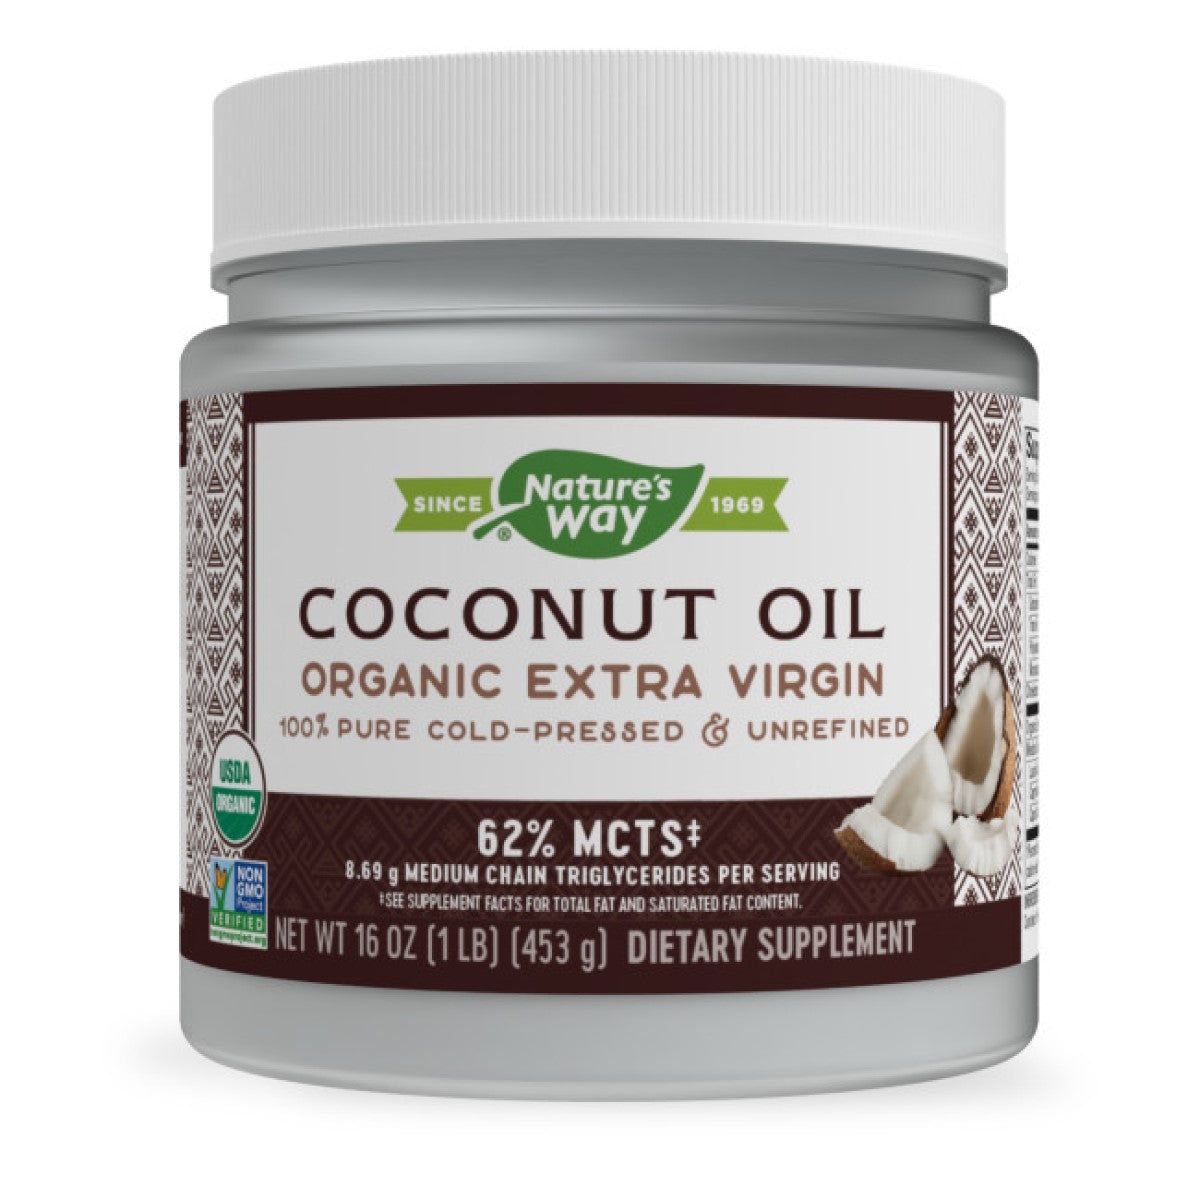 Primary image of Organic Extra Virgin Coconut Oil